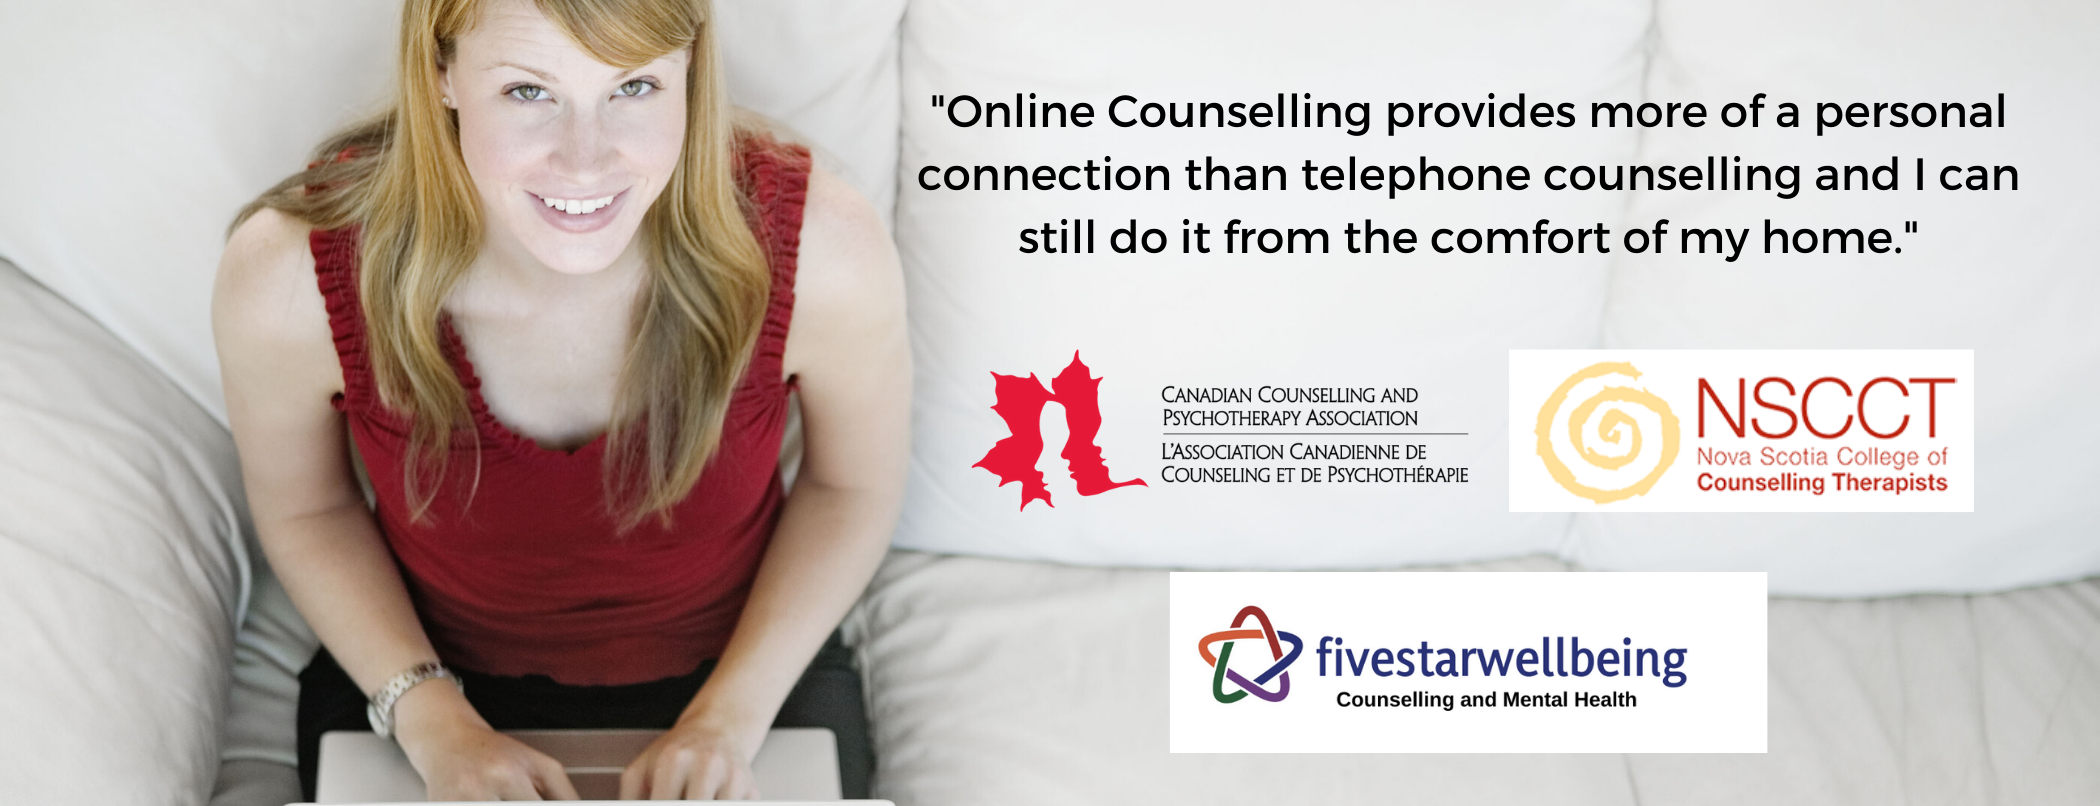 Benefits of Online Counselling